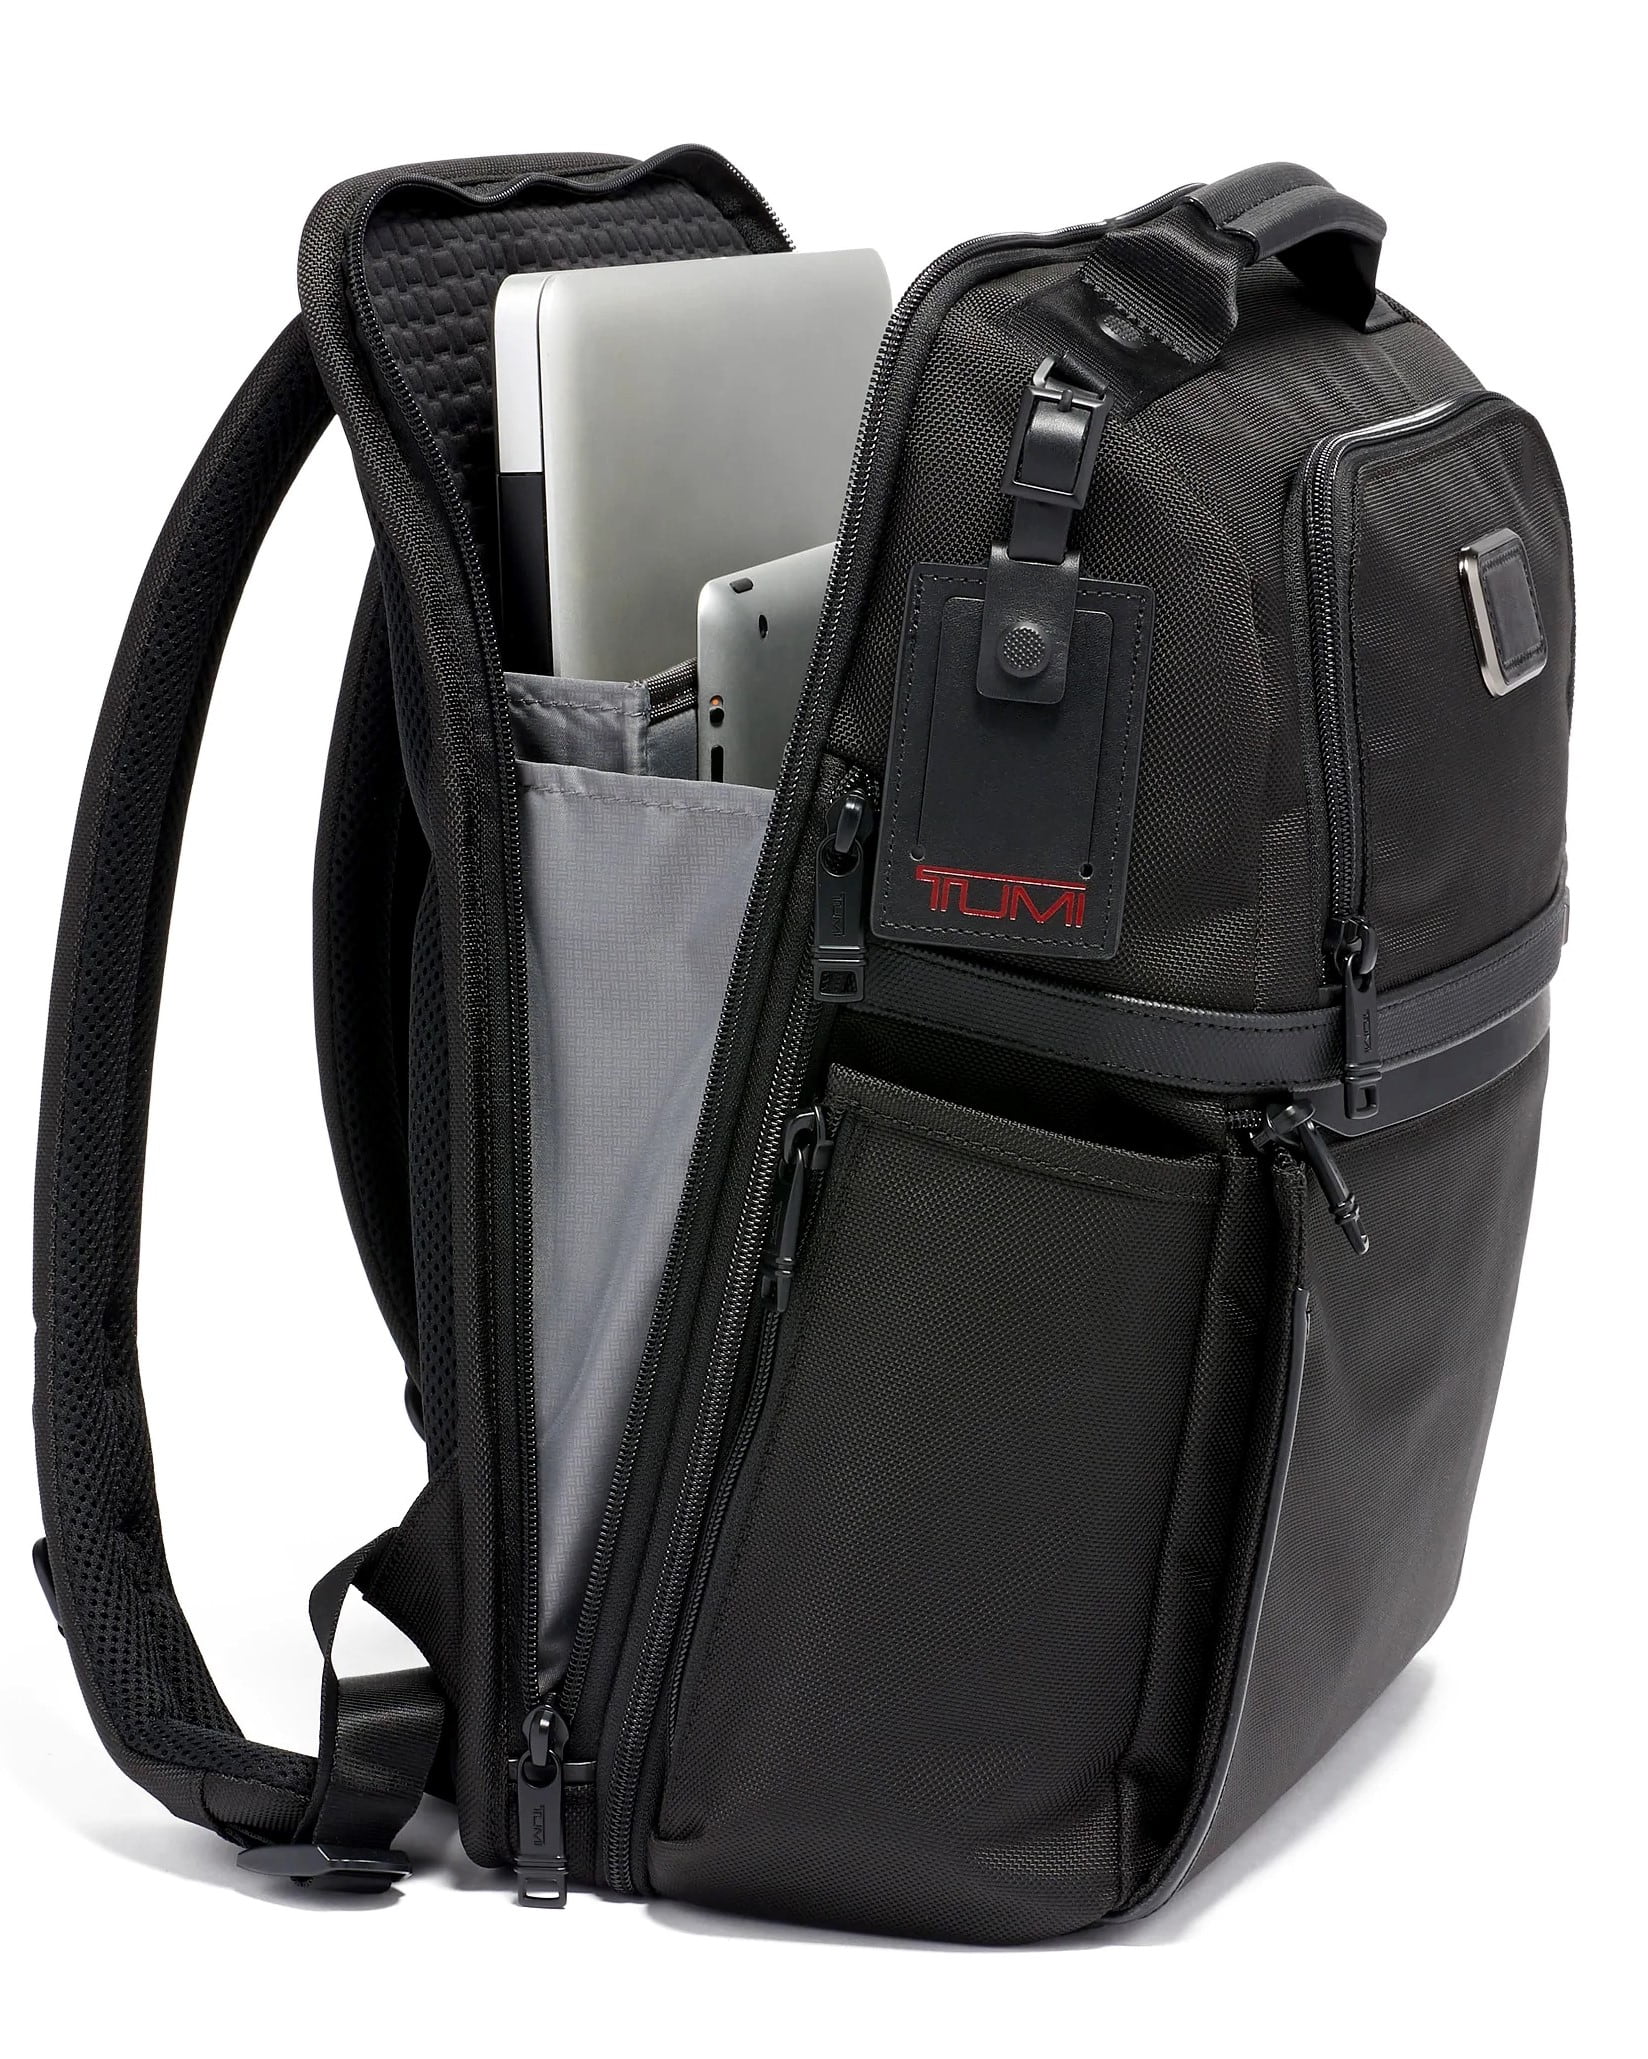 BALO UNISEX LAPTOP TUMI ALPHA SLIM SOLUTIONS BRIEF PACK BACKPACK 1